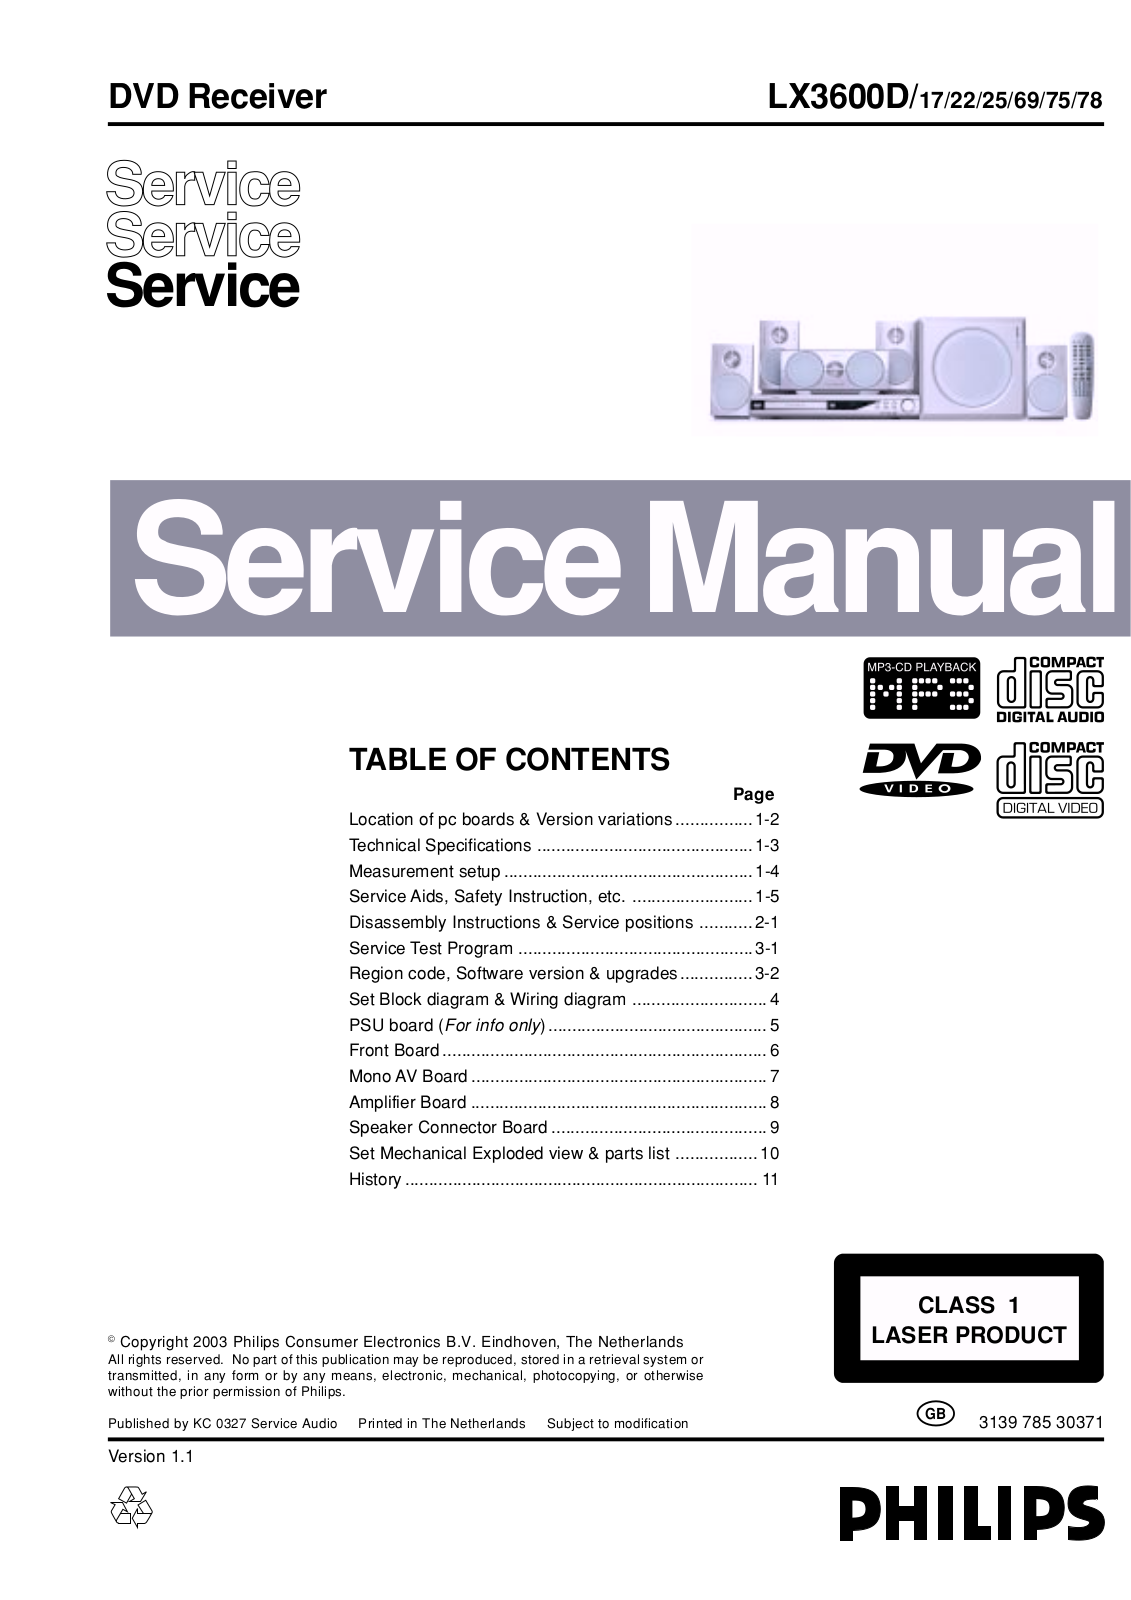 Philips LX3600D Service Manual